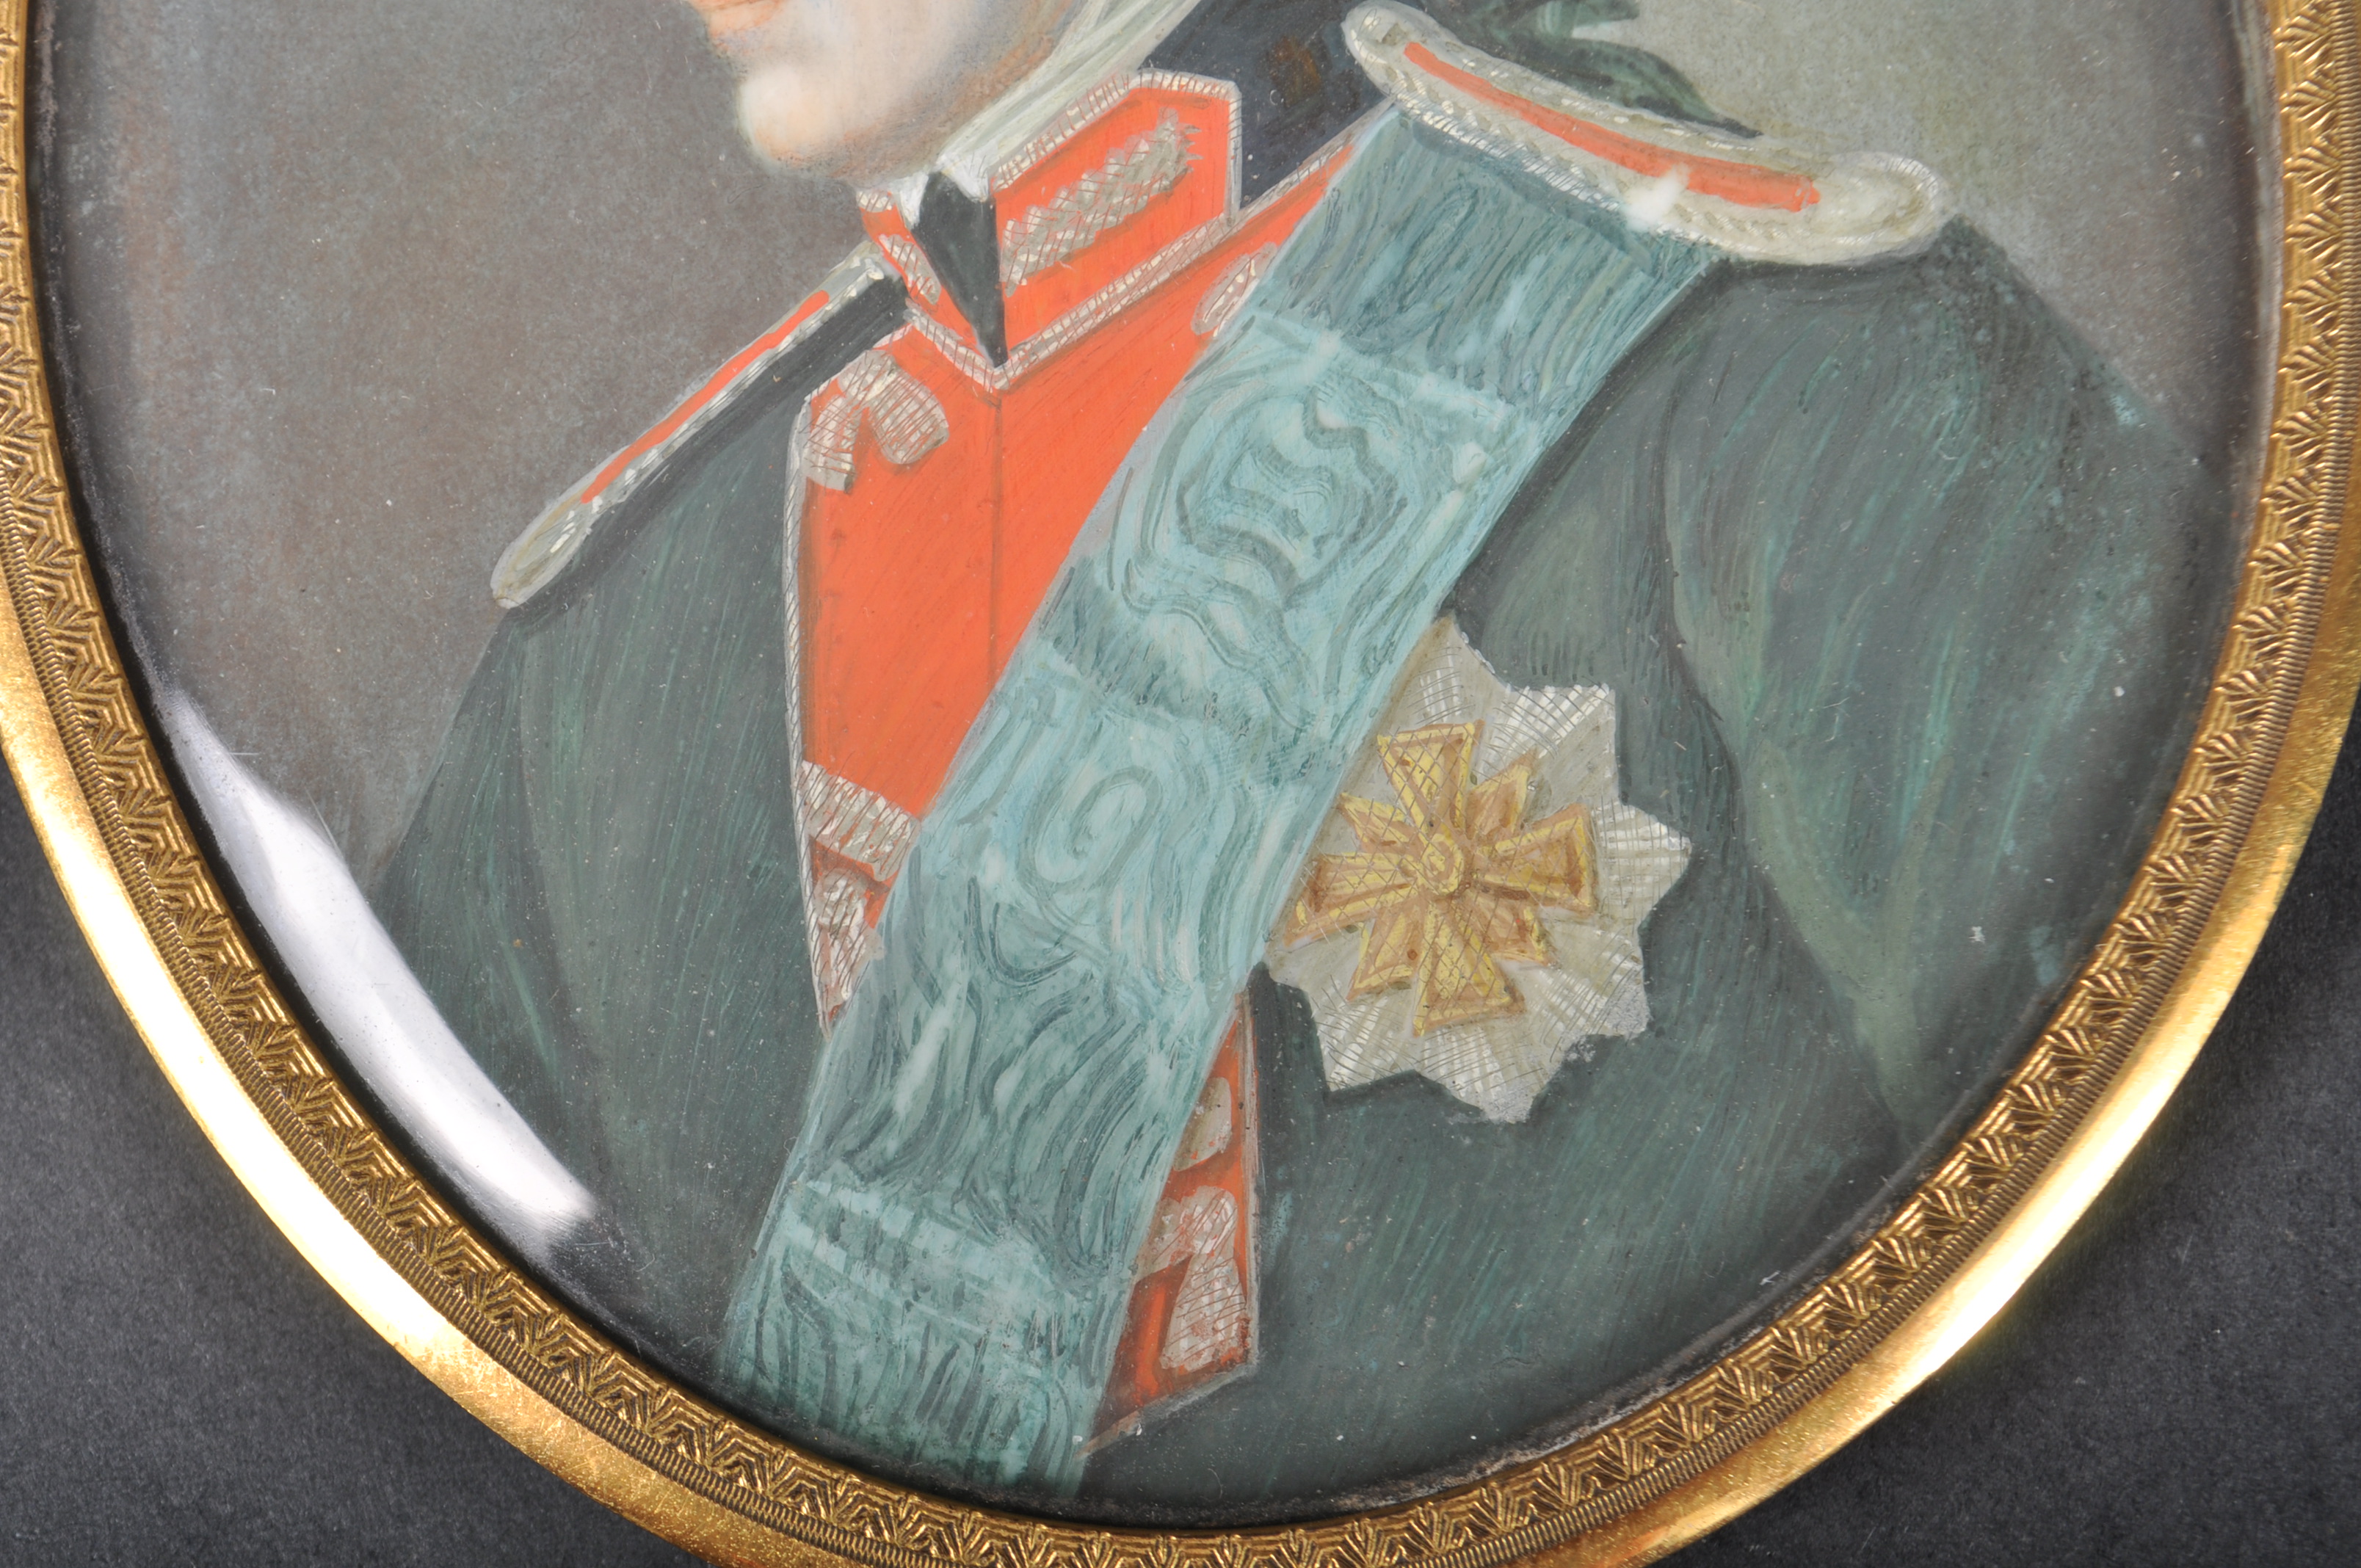 LATE 18TH CENTURY PORTRAIT MINIATURE OF COUNT RUMFORD - Image 7 of 7